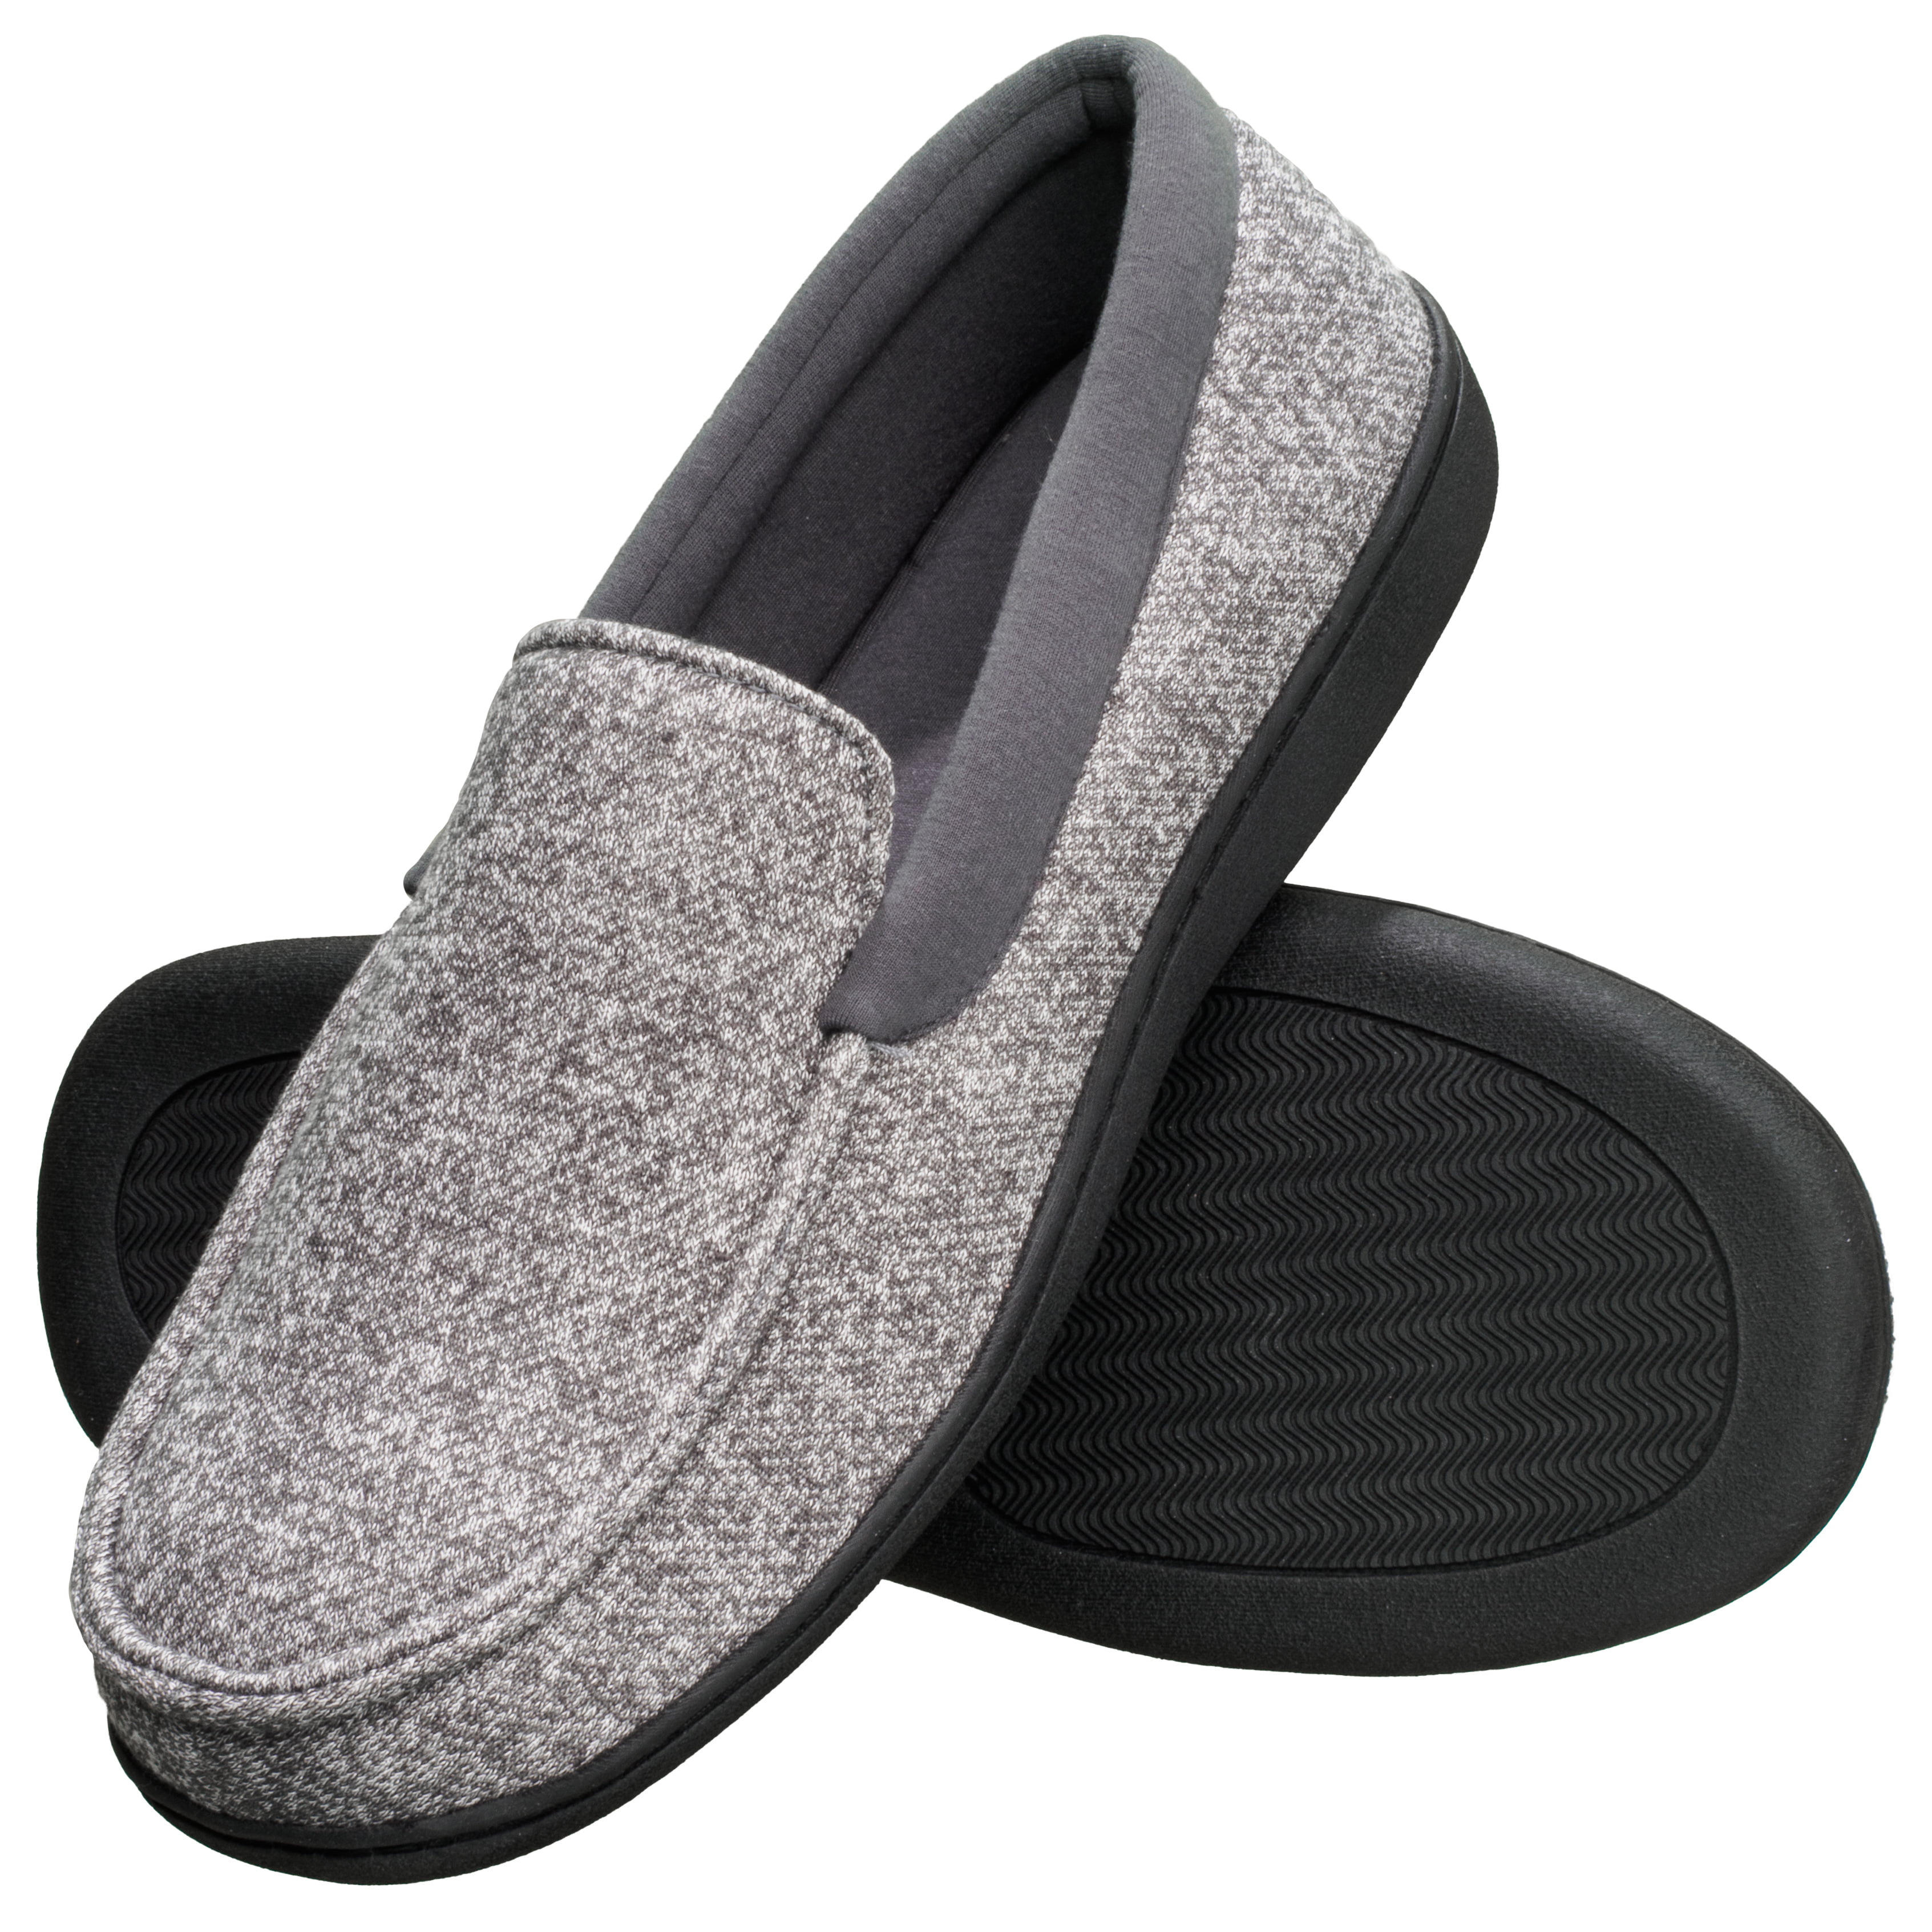 Mens Slippers Slip On Twin Gusset Indoor Home Bedroom House Slippers Shoes Size 